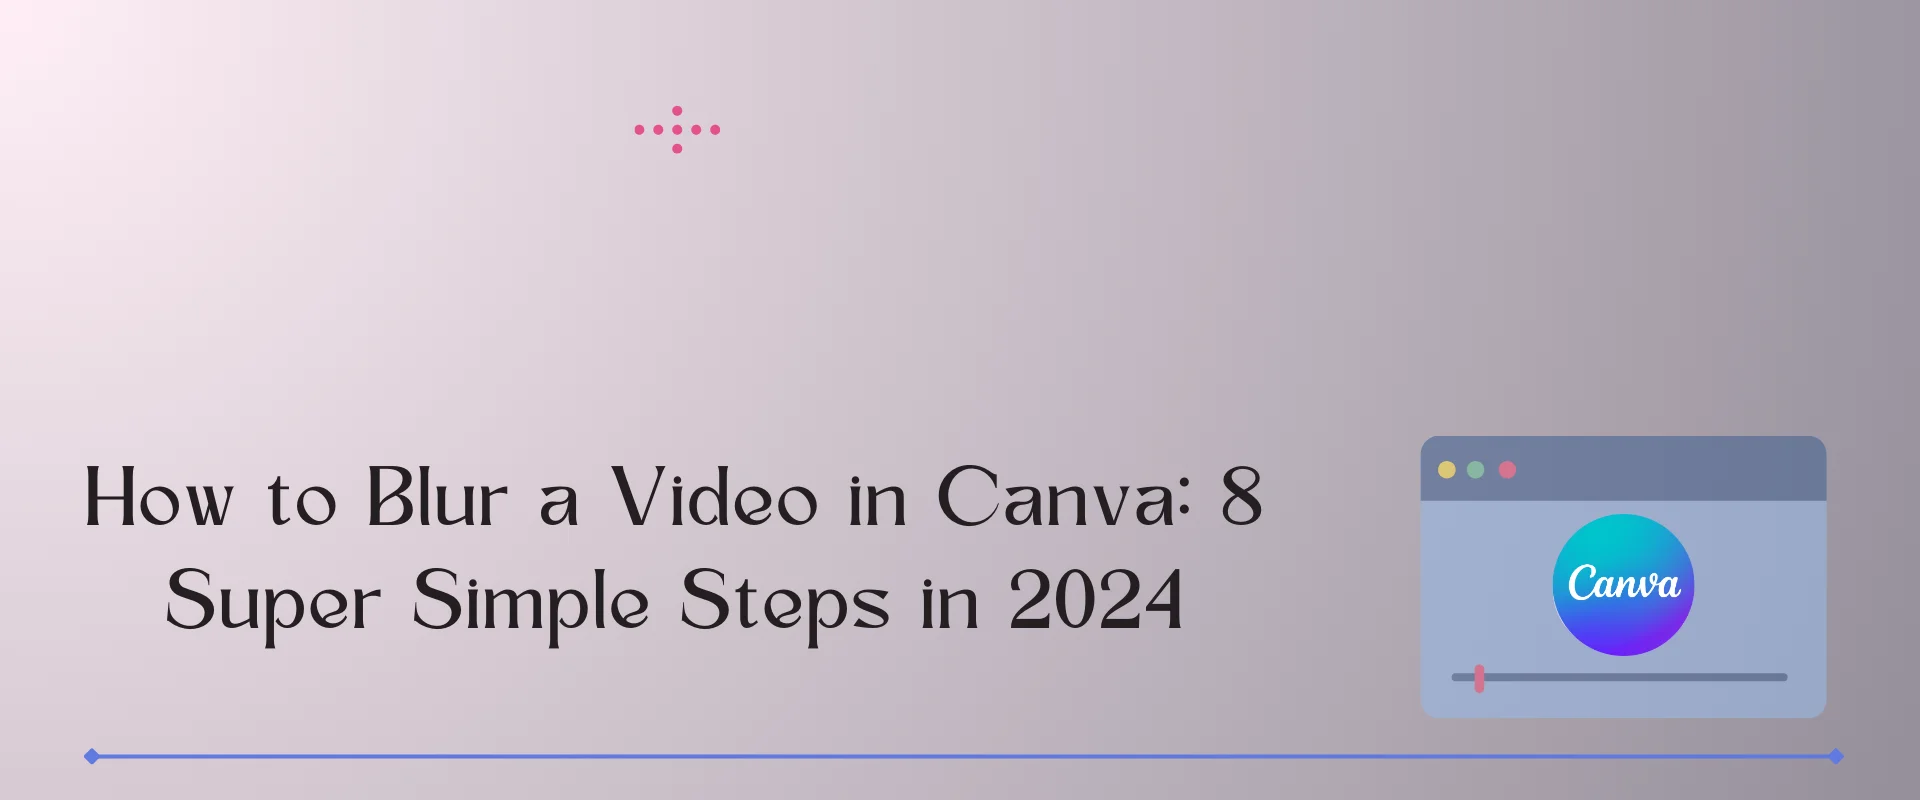 how to blur a video in canva